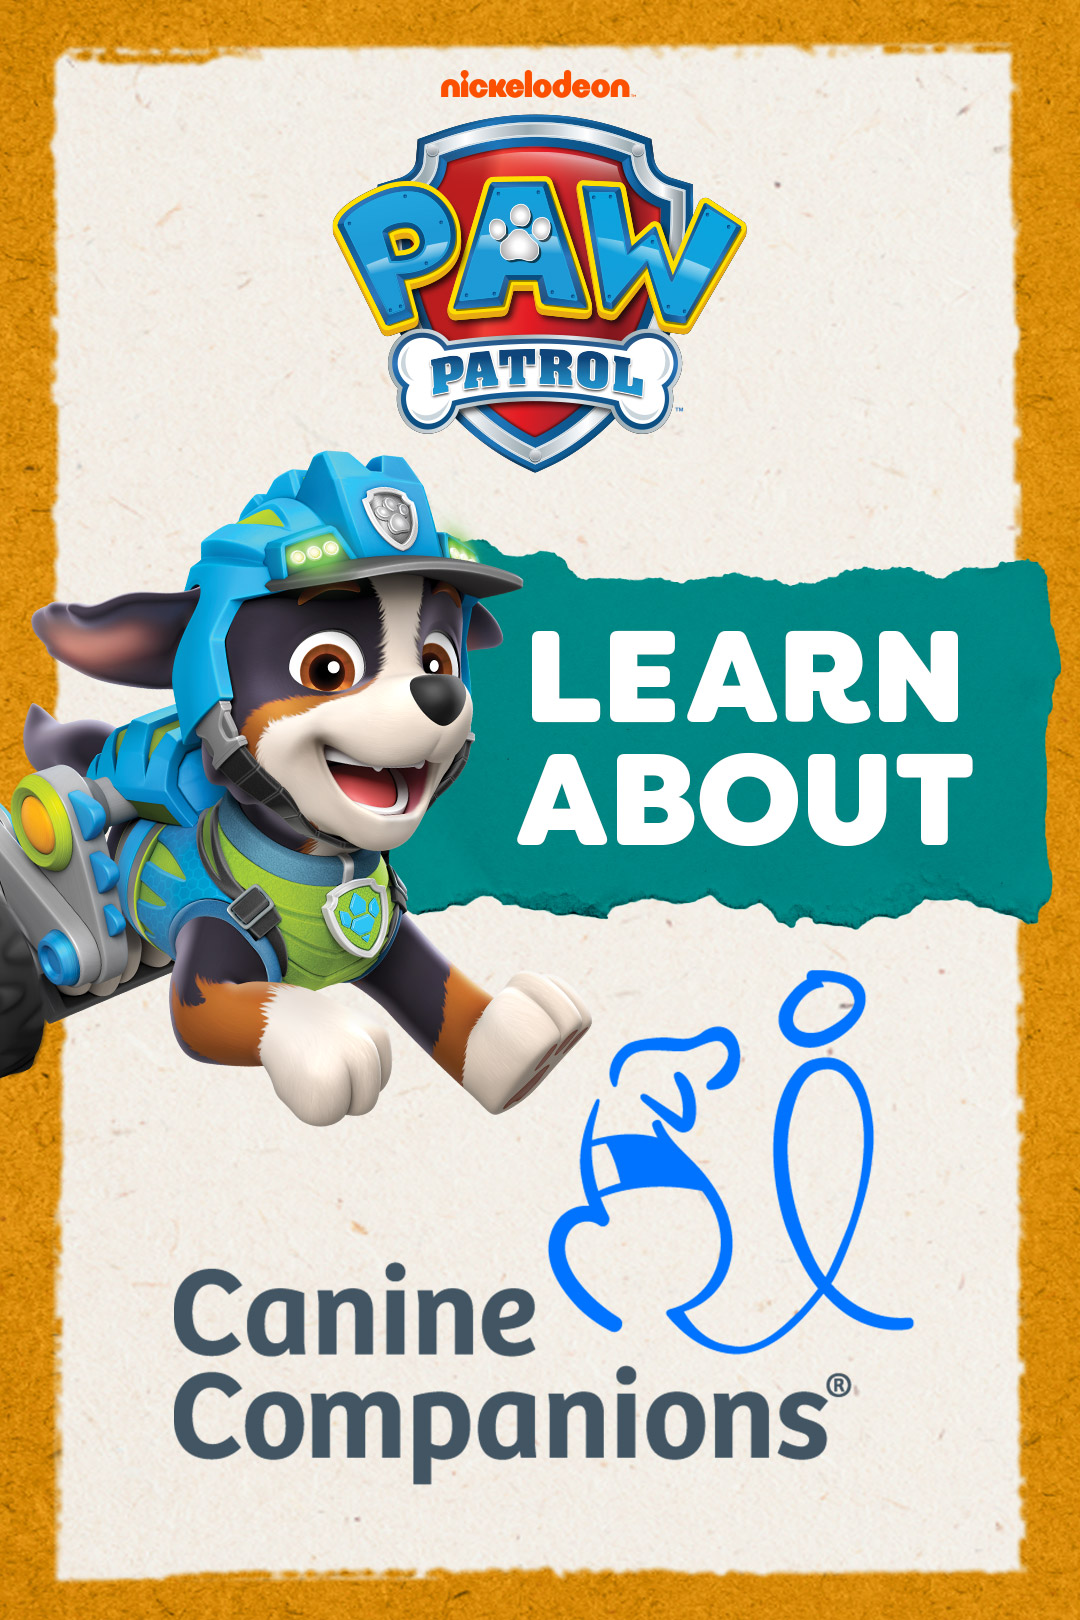 Header Image for article: includes image of Rex, PAW Patrol logo, and Canine Companions logo